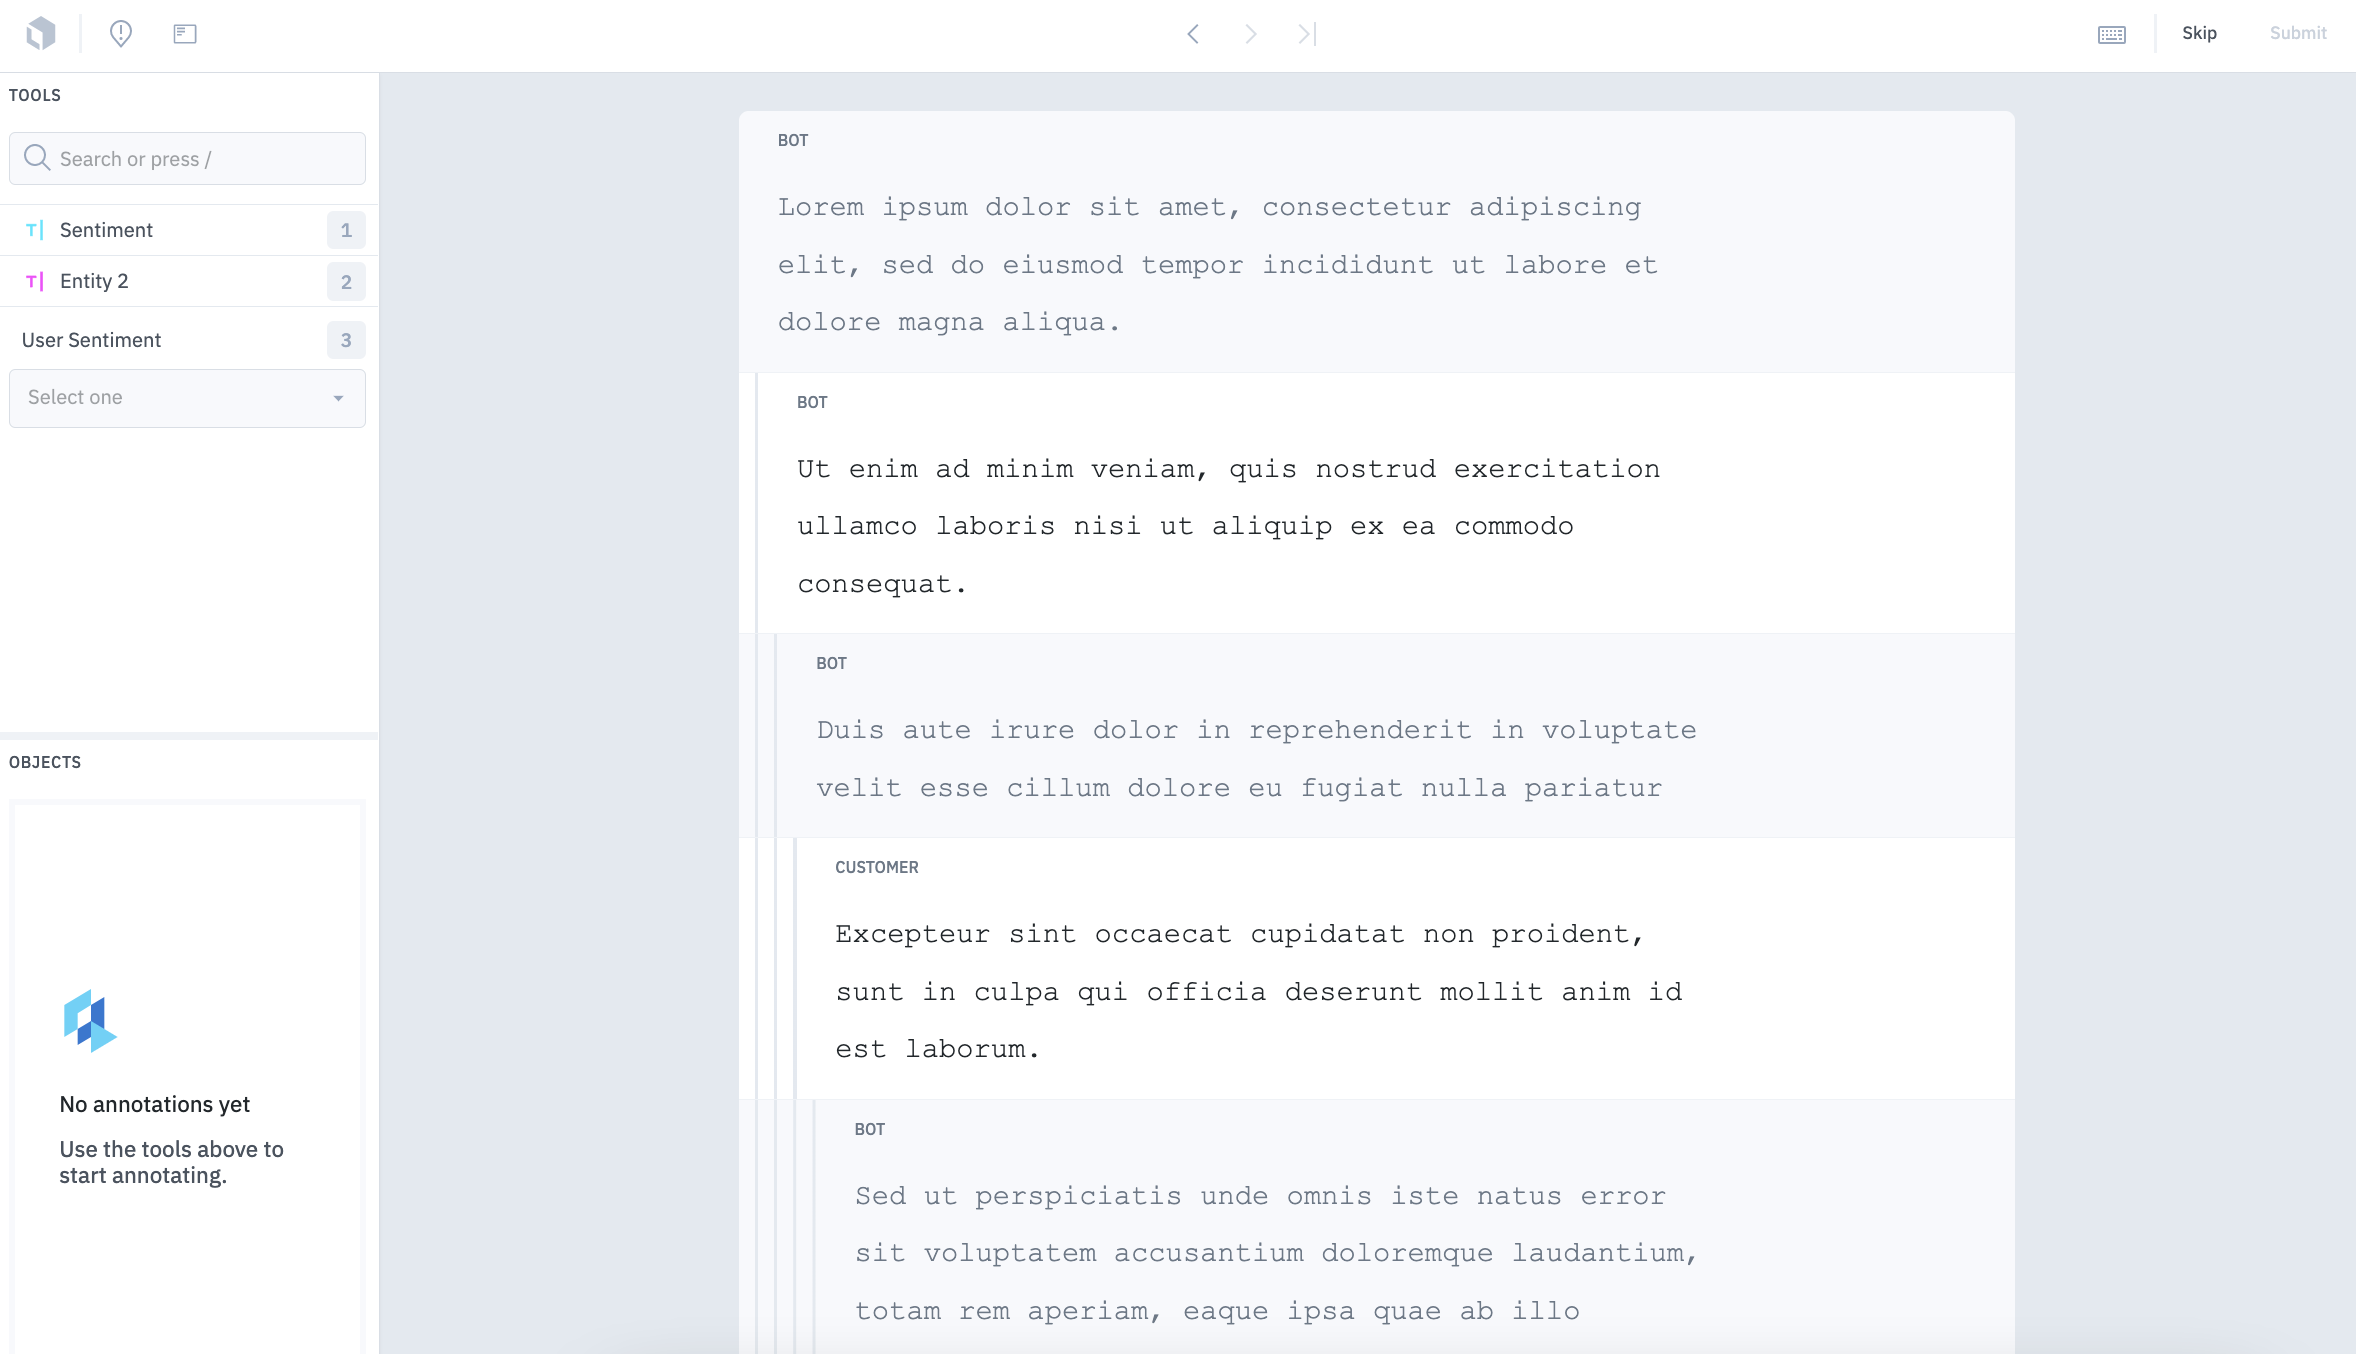 Thread based UI used for annotating text in the context of a multi-user thread.